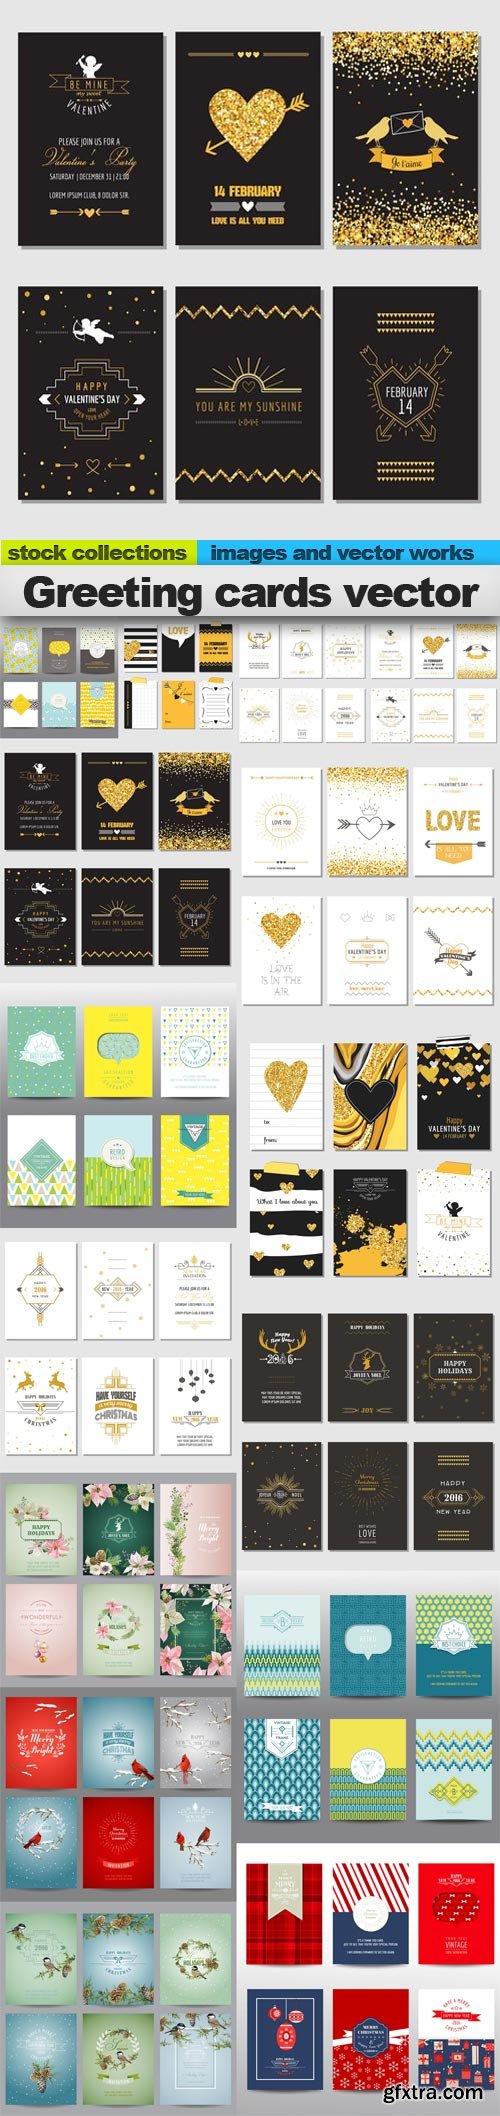 Greeting cards vector, 15 x EPS